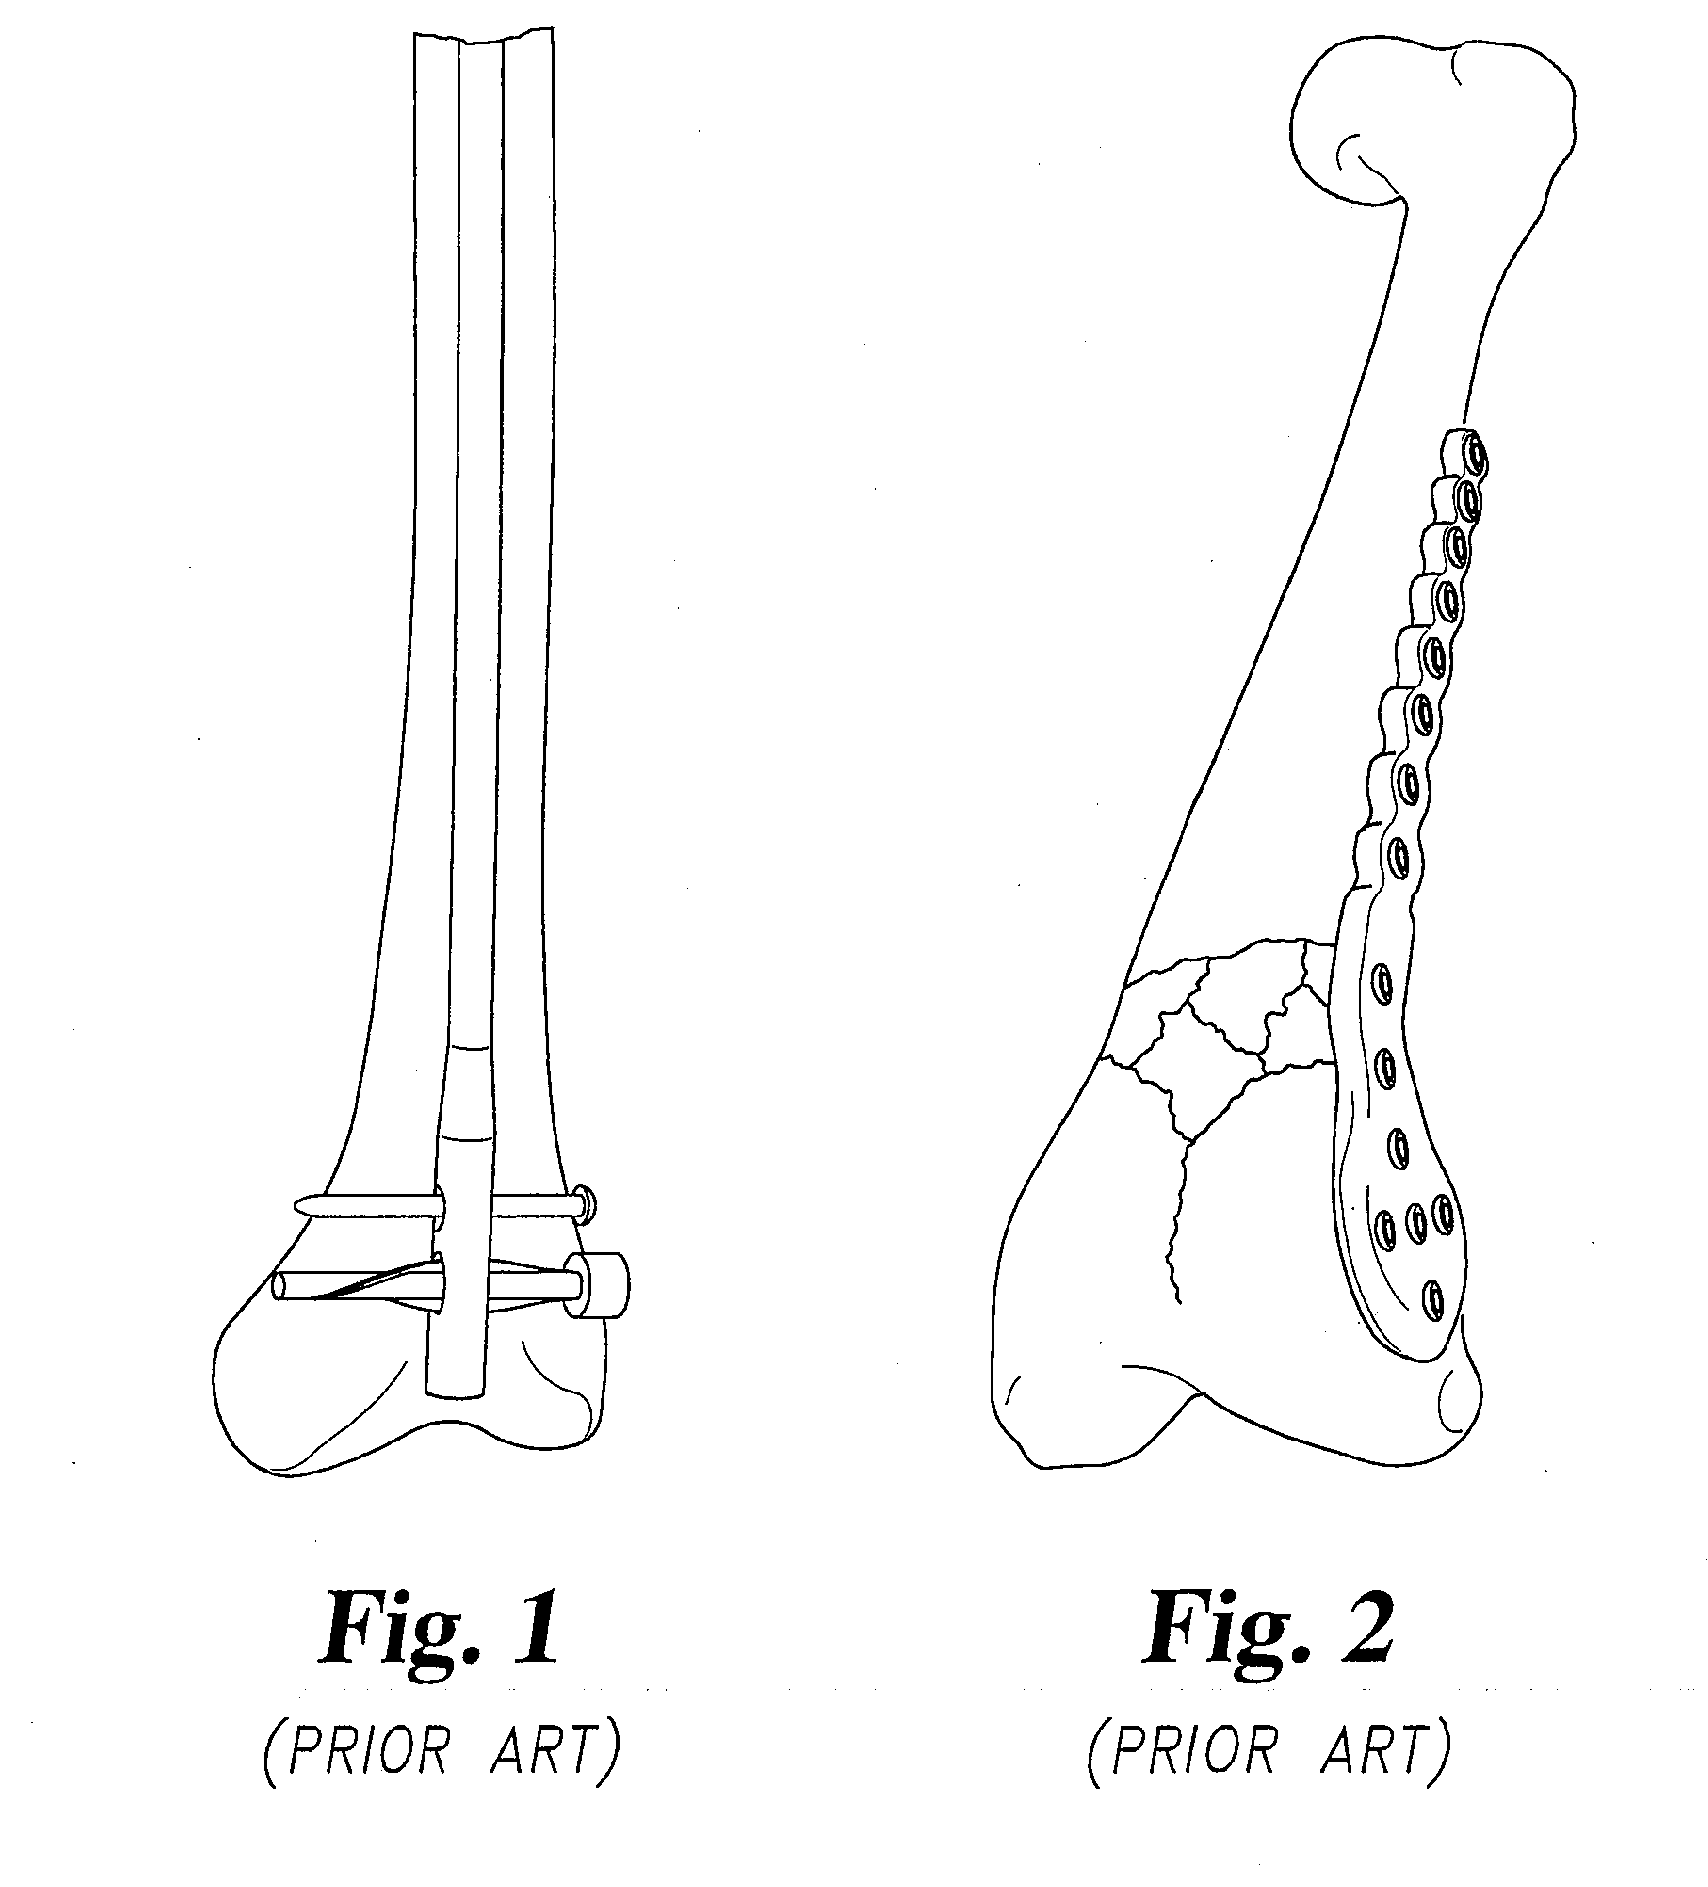 Long bone fixation system and methods